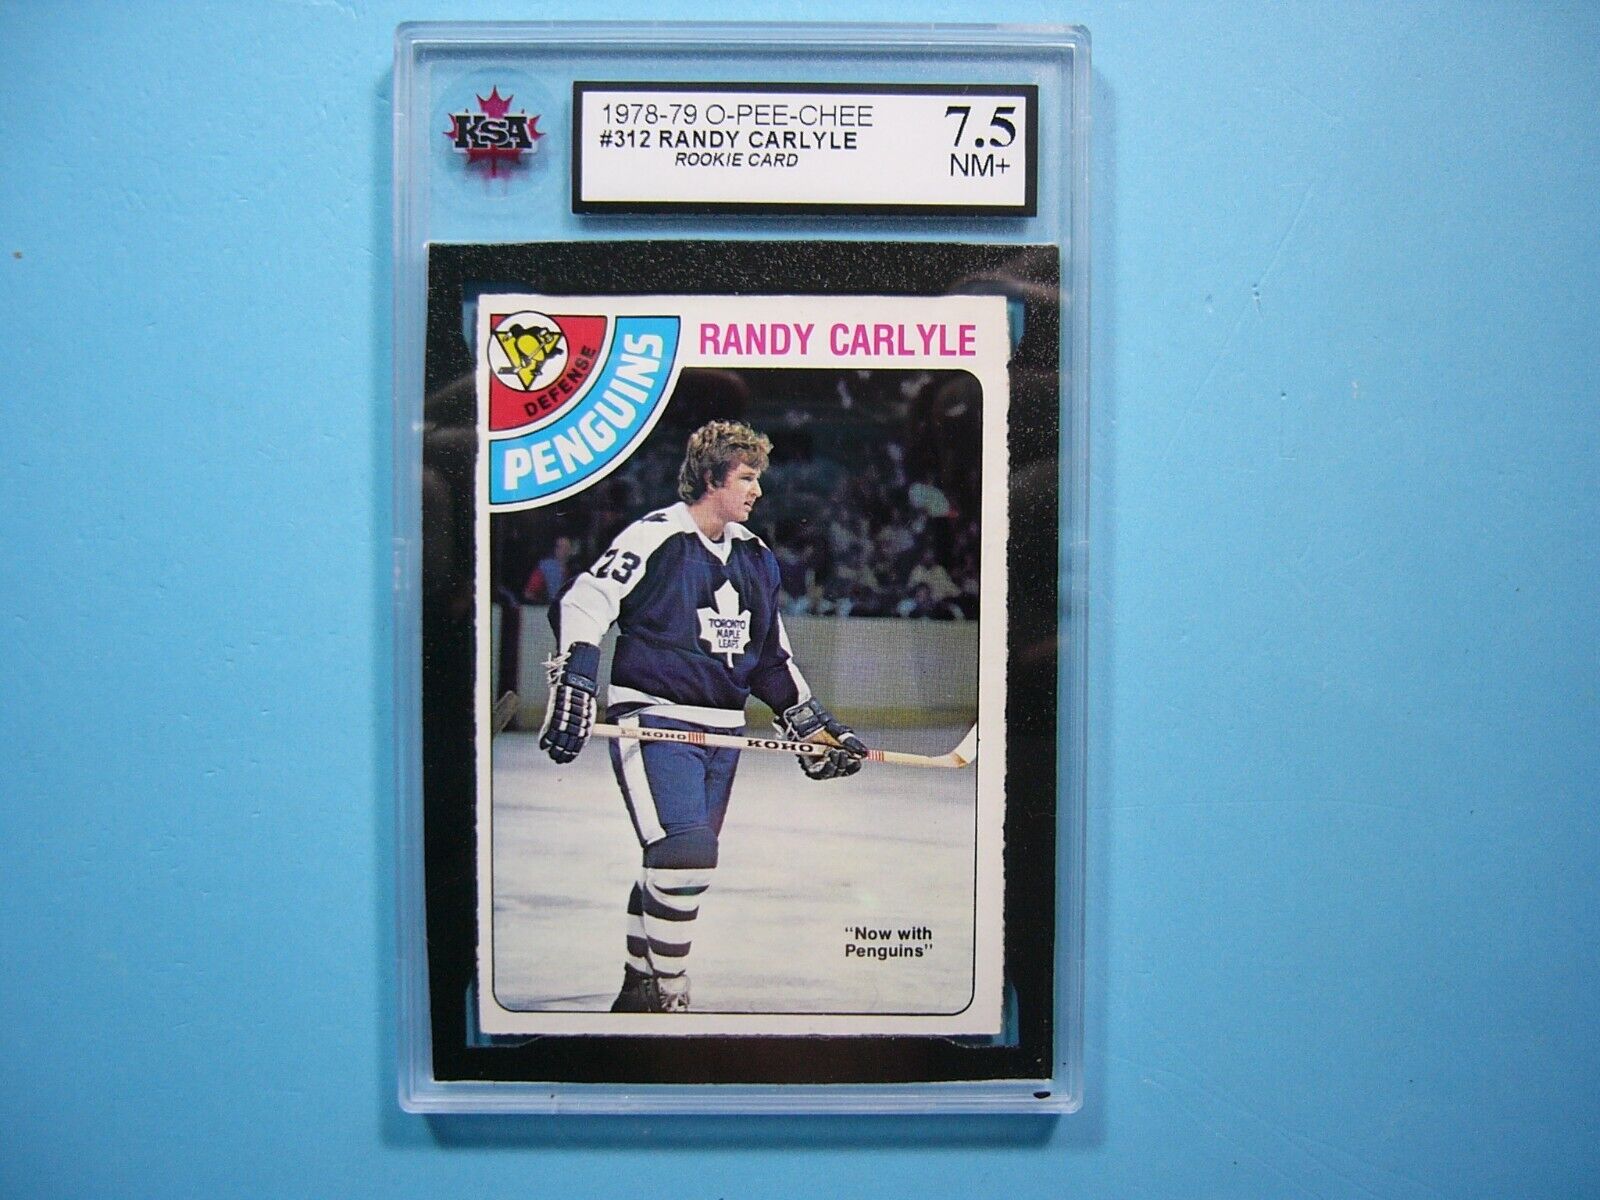 1978/79 O-PEE-CHEE NHL HOCKEY CARD #312 RANDY CARLYLE ROOKIE RC KSA 7.5 NM+ OPC. rookie card picture